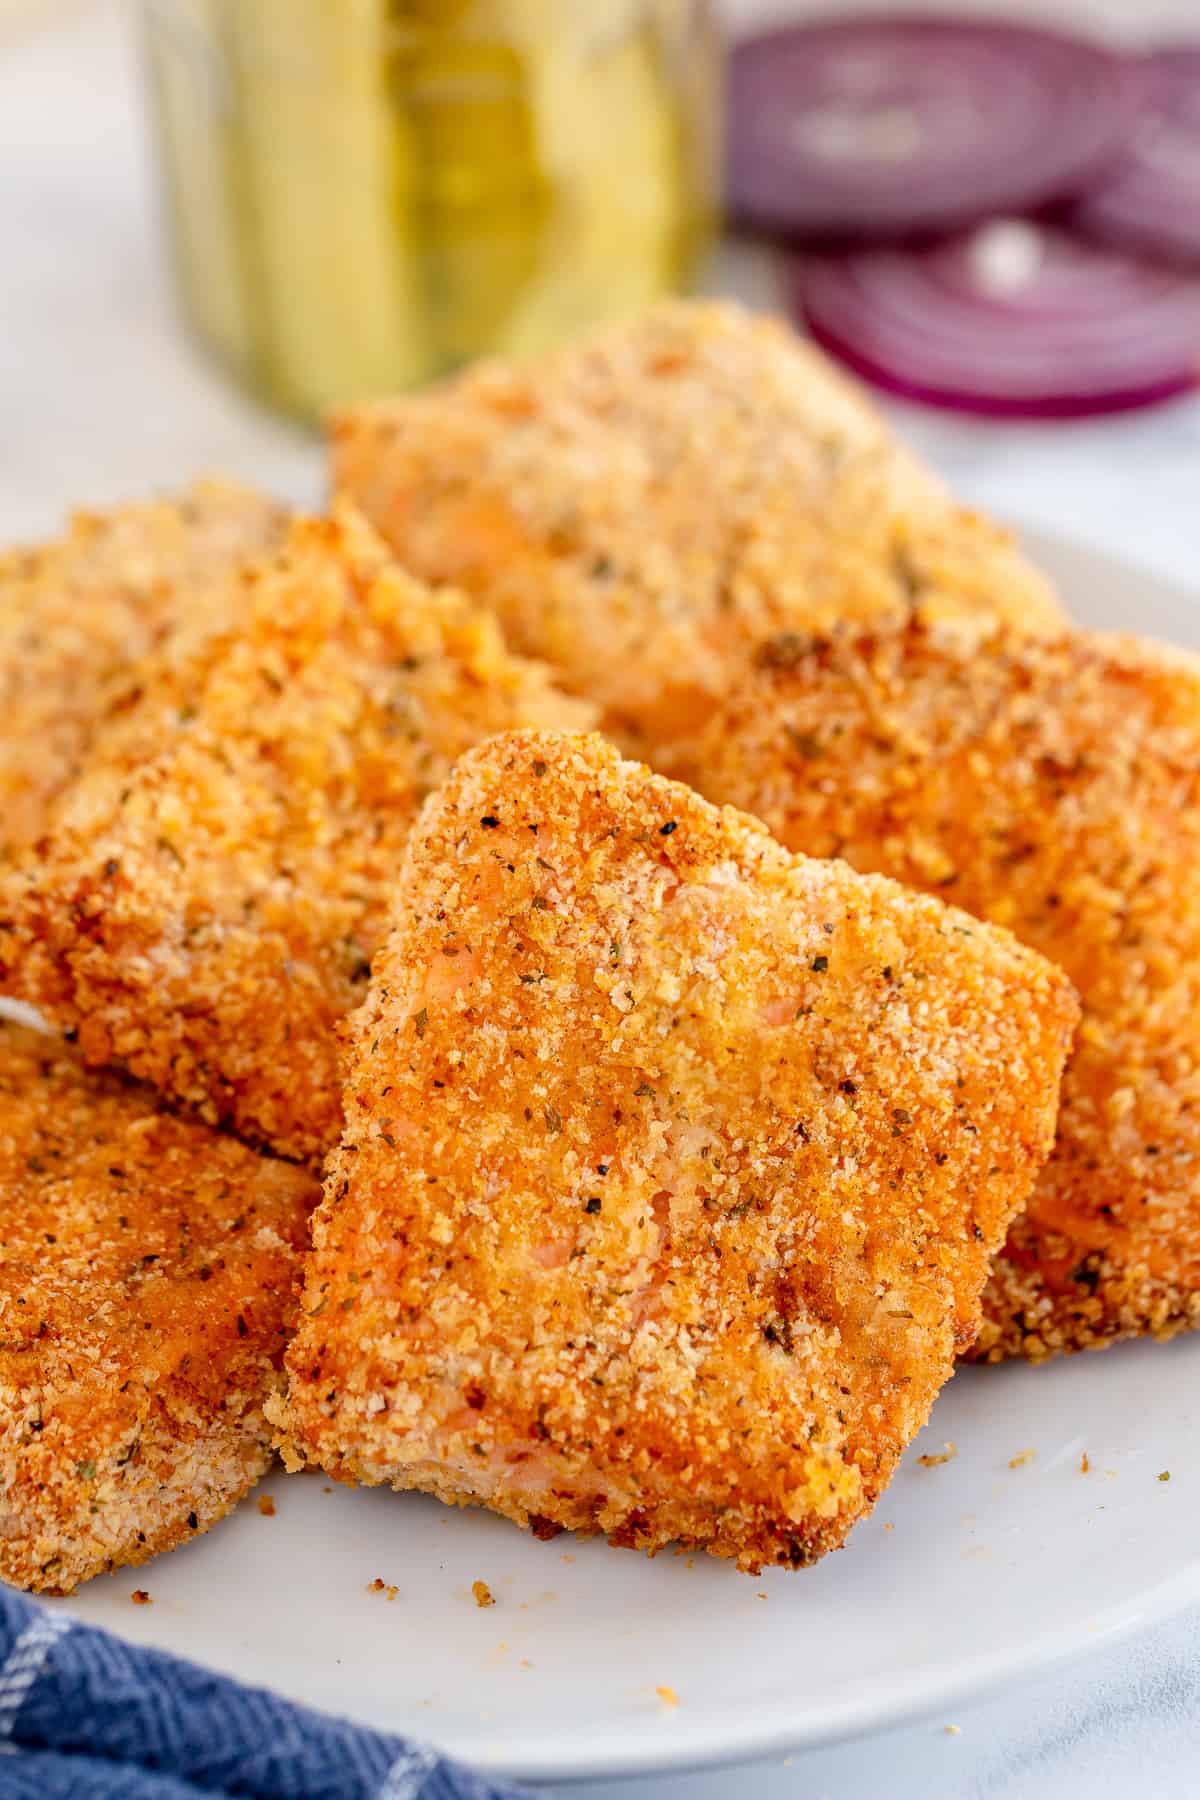 Breaded air fried salmon fillets on a plate.